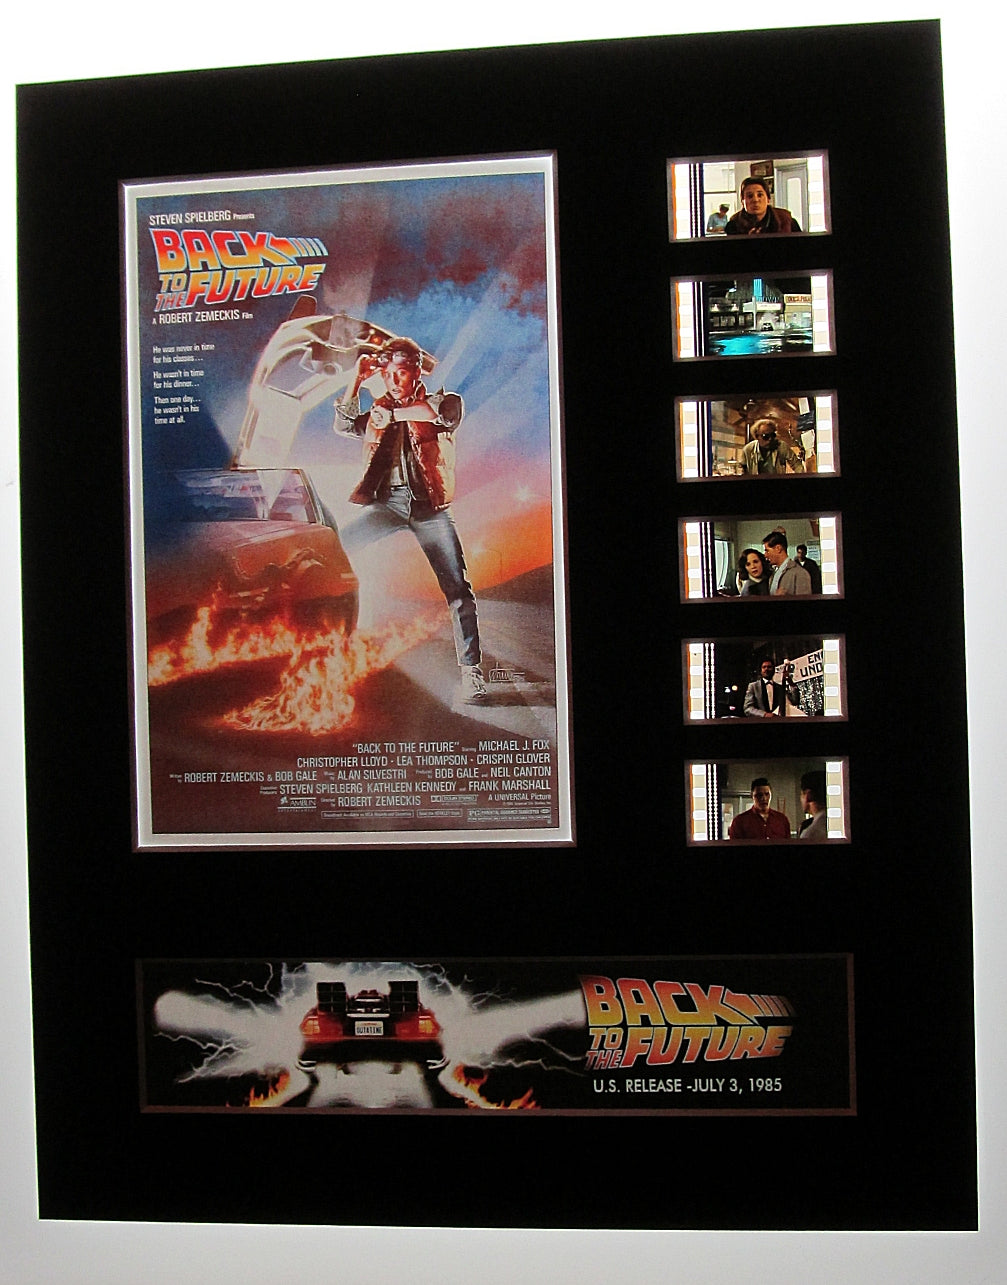 BACK TO THE FUTURE 1985 Michael J Fox 35mm Movie Film Cell Display 8x10